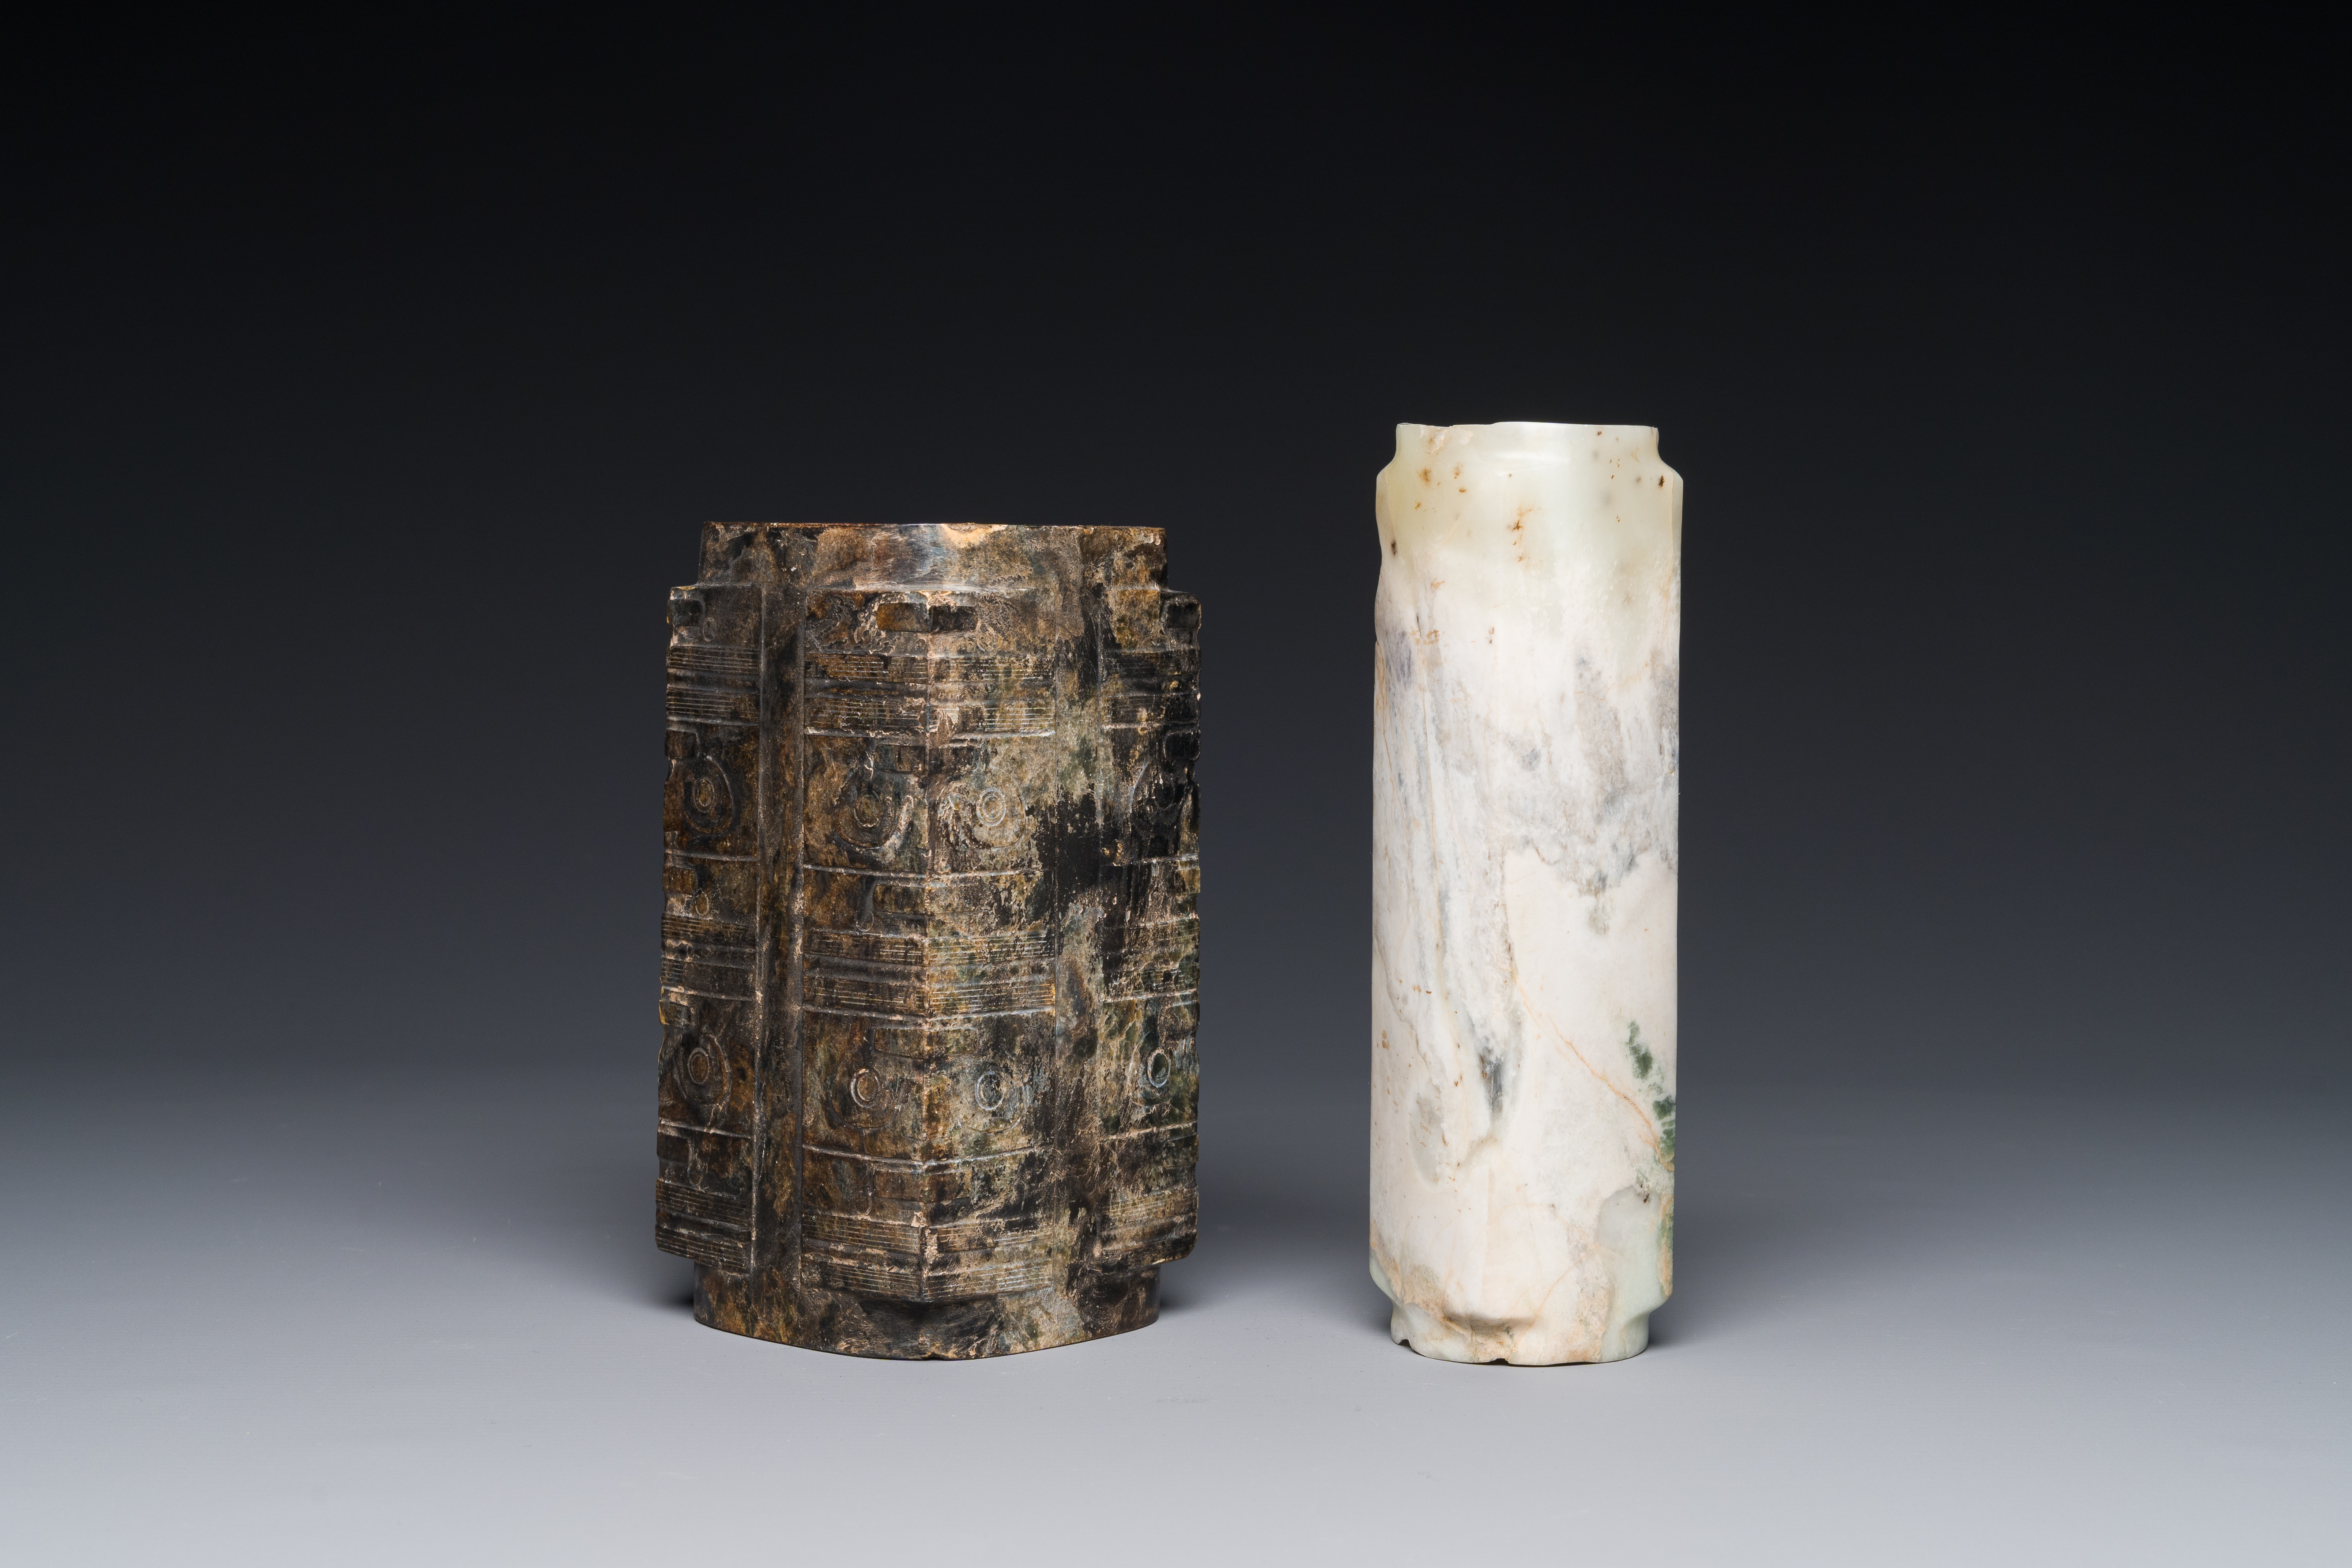 Two Chinese jade ritual 'cong' vases, 2/4th C. B.C.